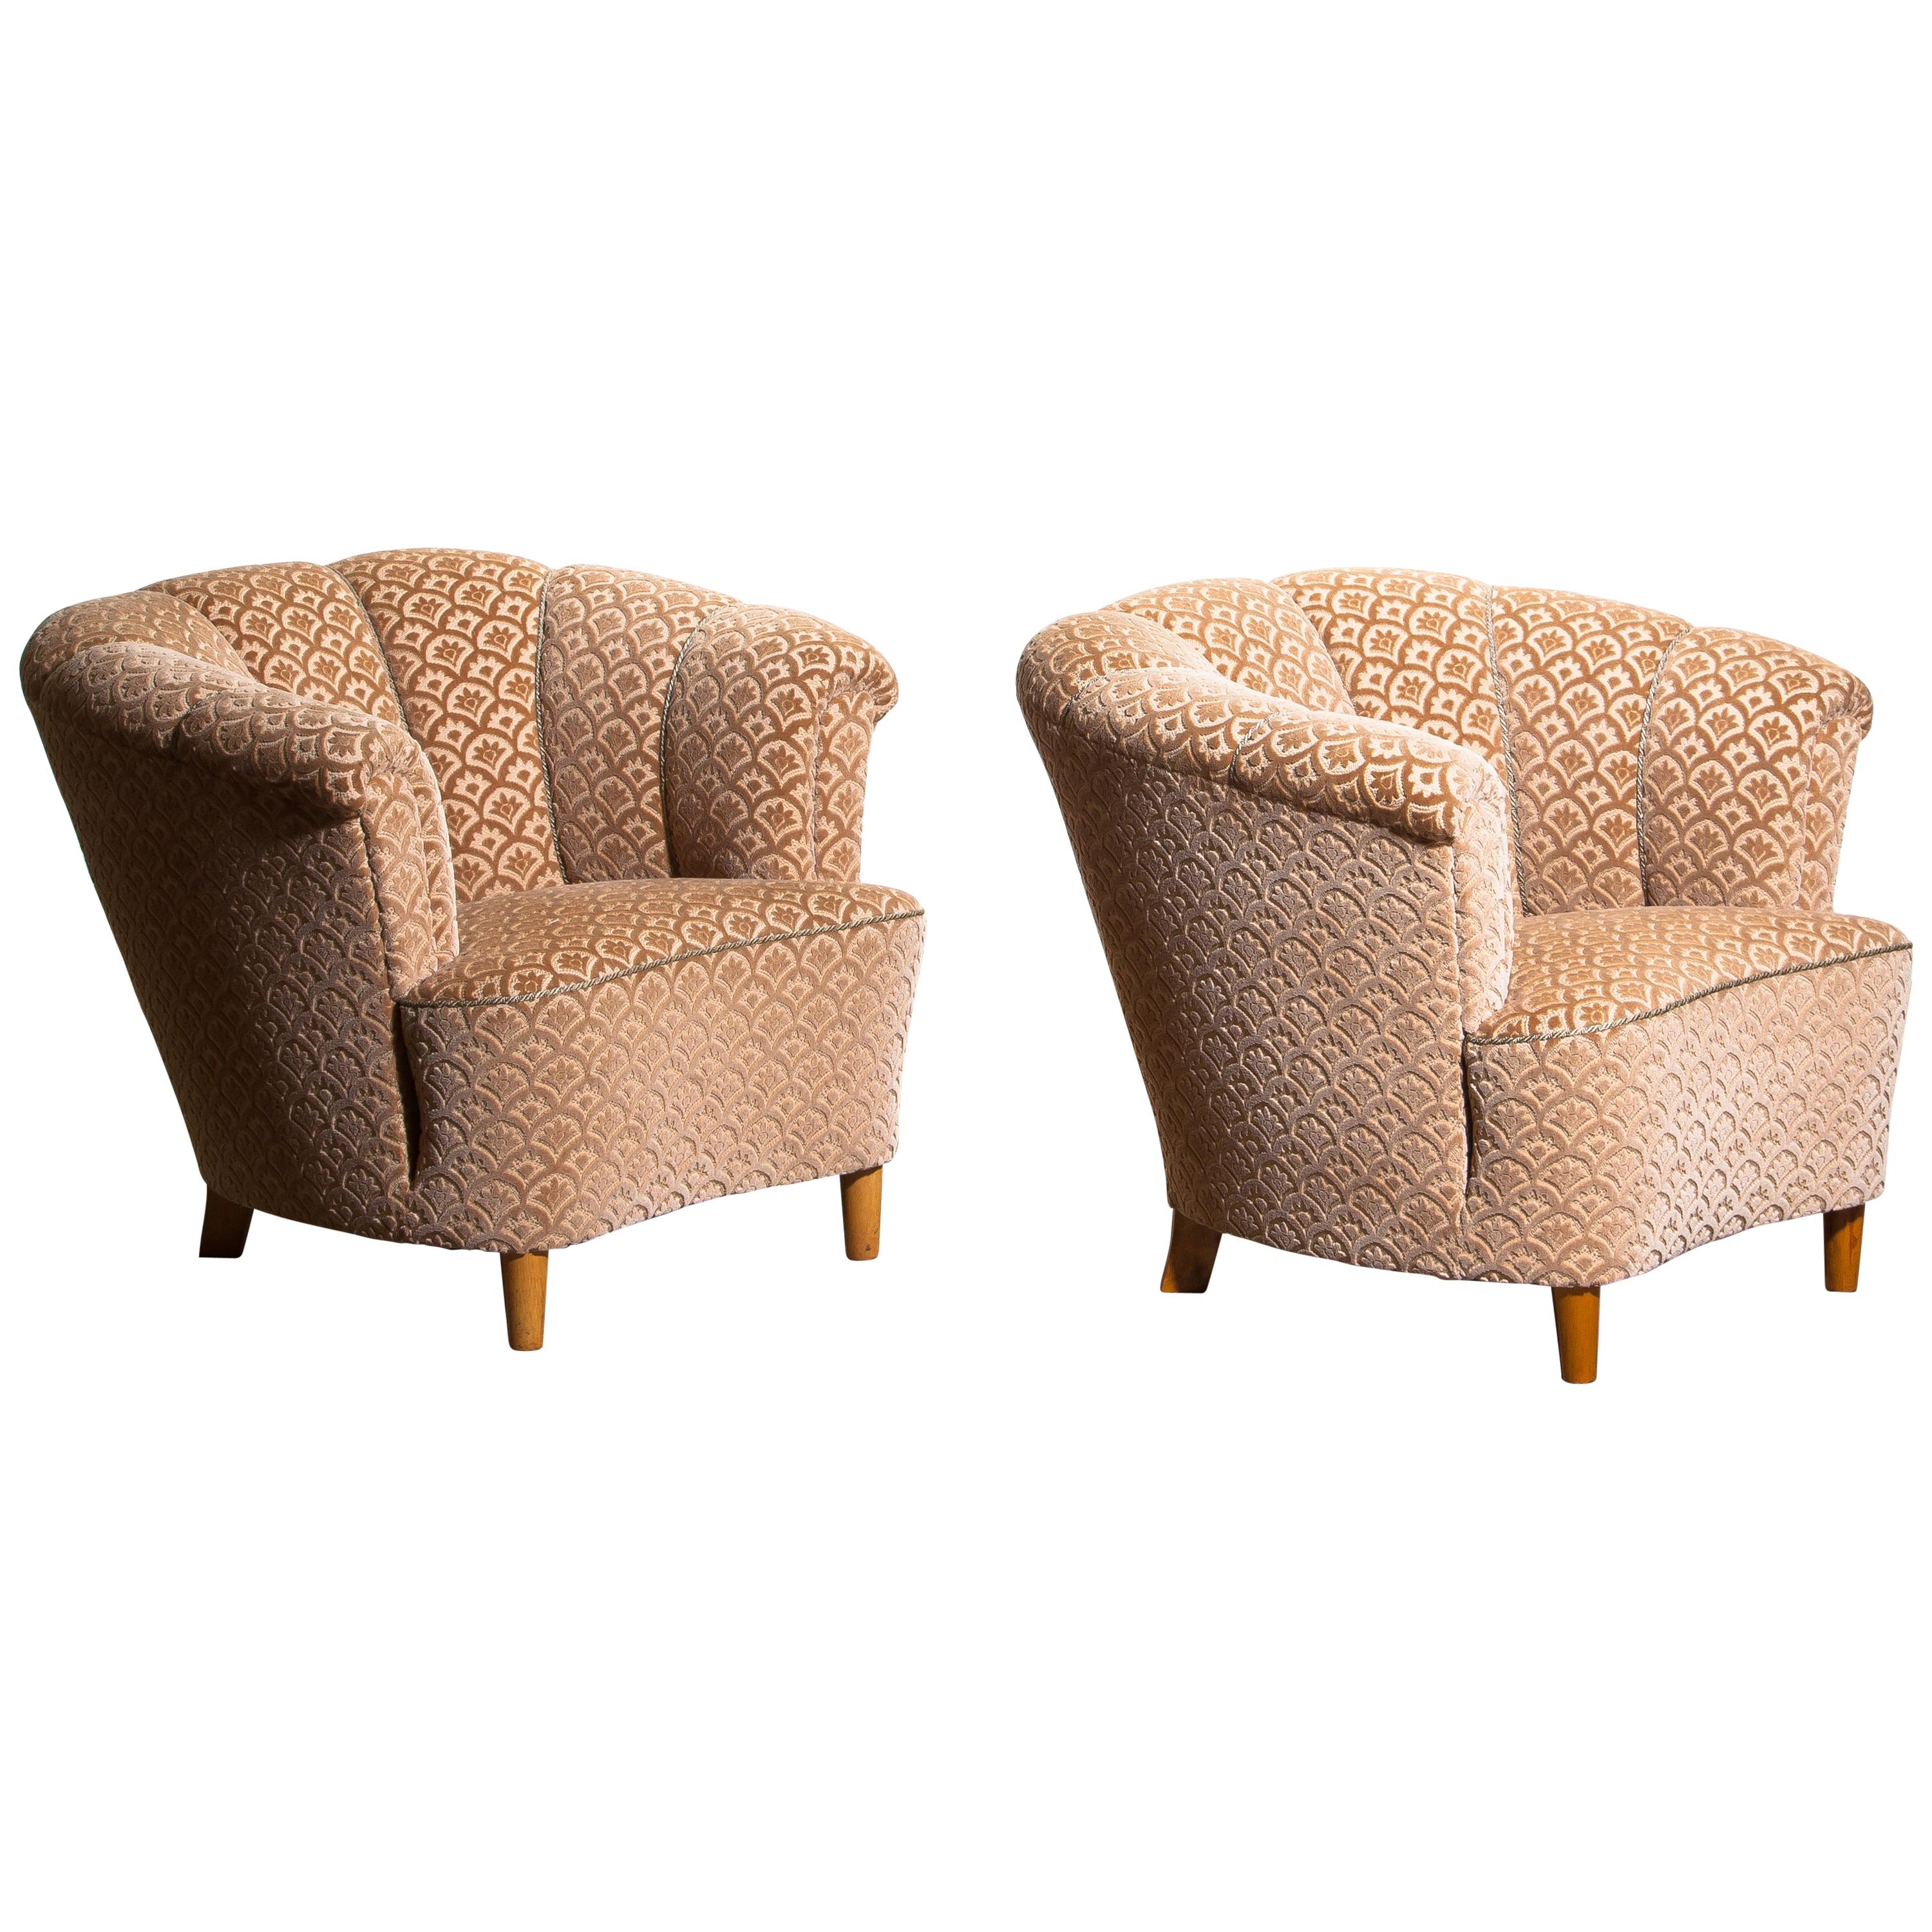 1940s, Pair of Shell Back Easy or Cocktail Chairs from Sweden